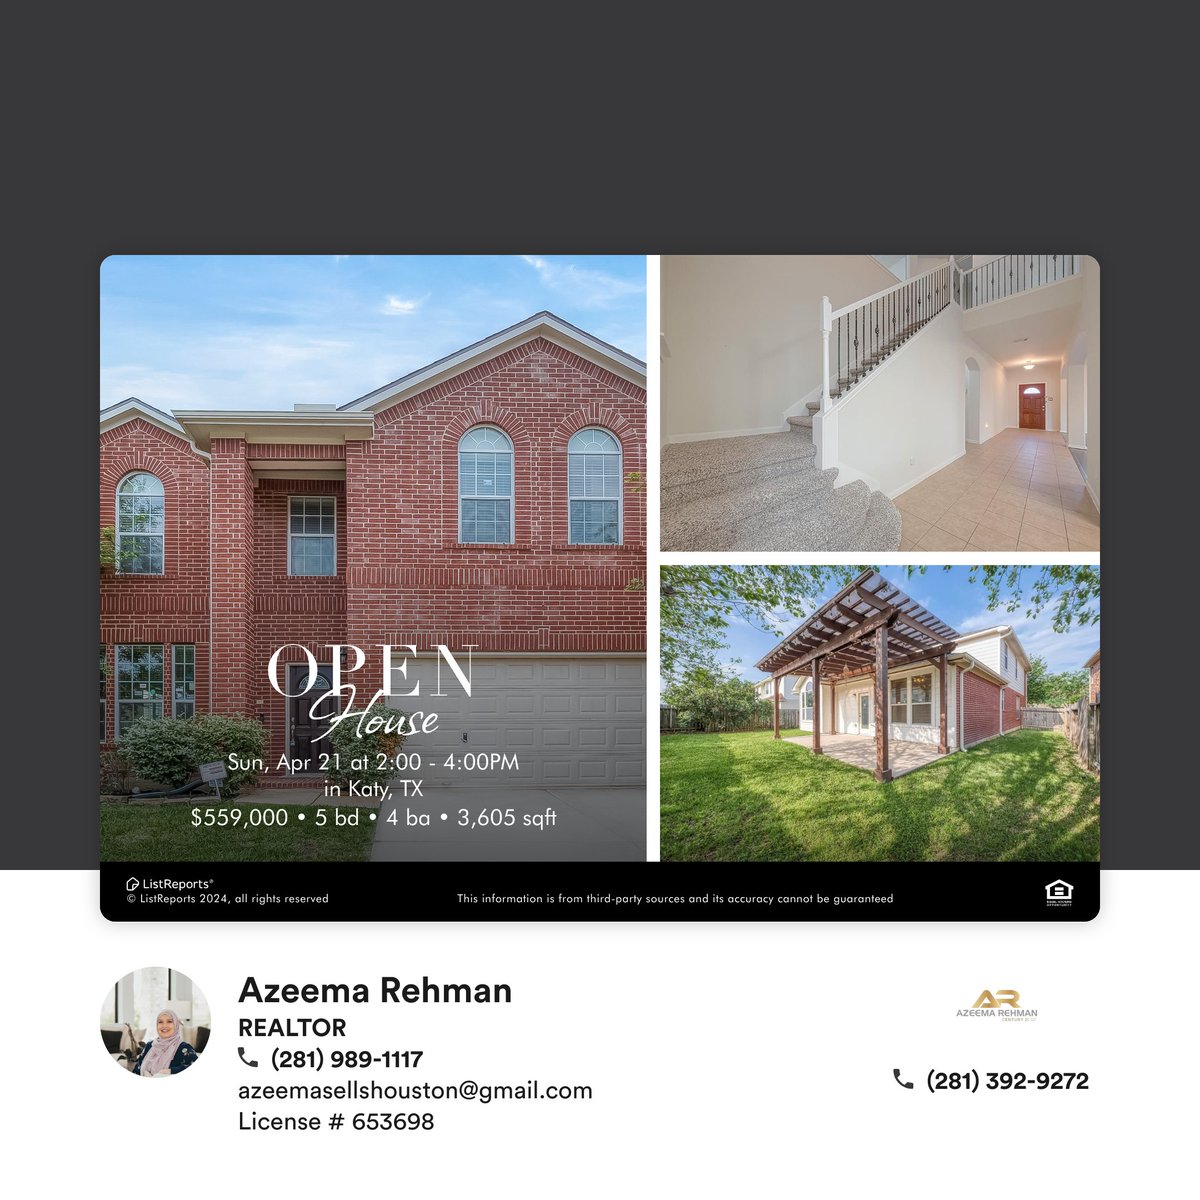 Come see this beautiful home person this Sunday, April 21st from 2:00 - 4:00PM.

#home #house #listreports #property #openhouse #forsale #househunting #dreamhome #katyhomes #houstonhomes #houstonrealtor #katyrealtor